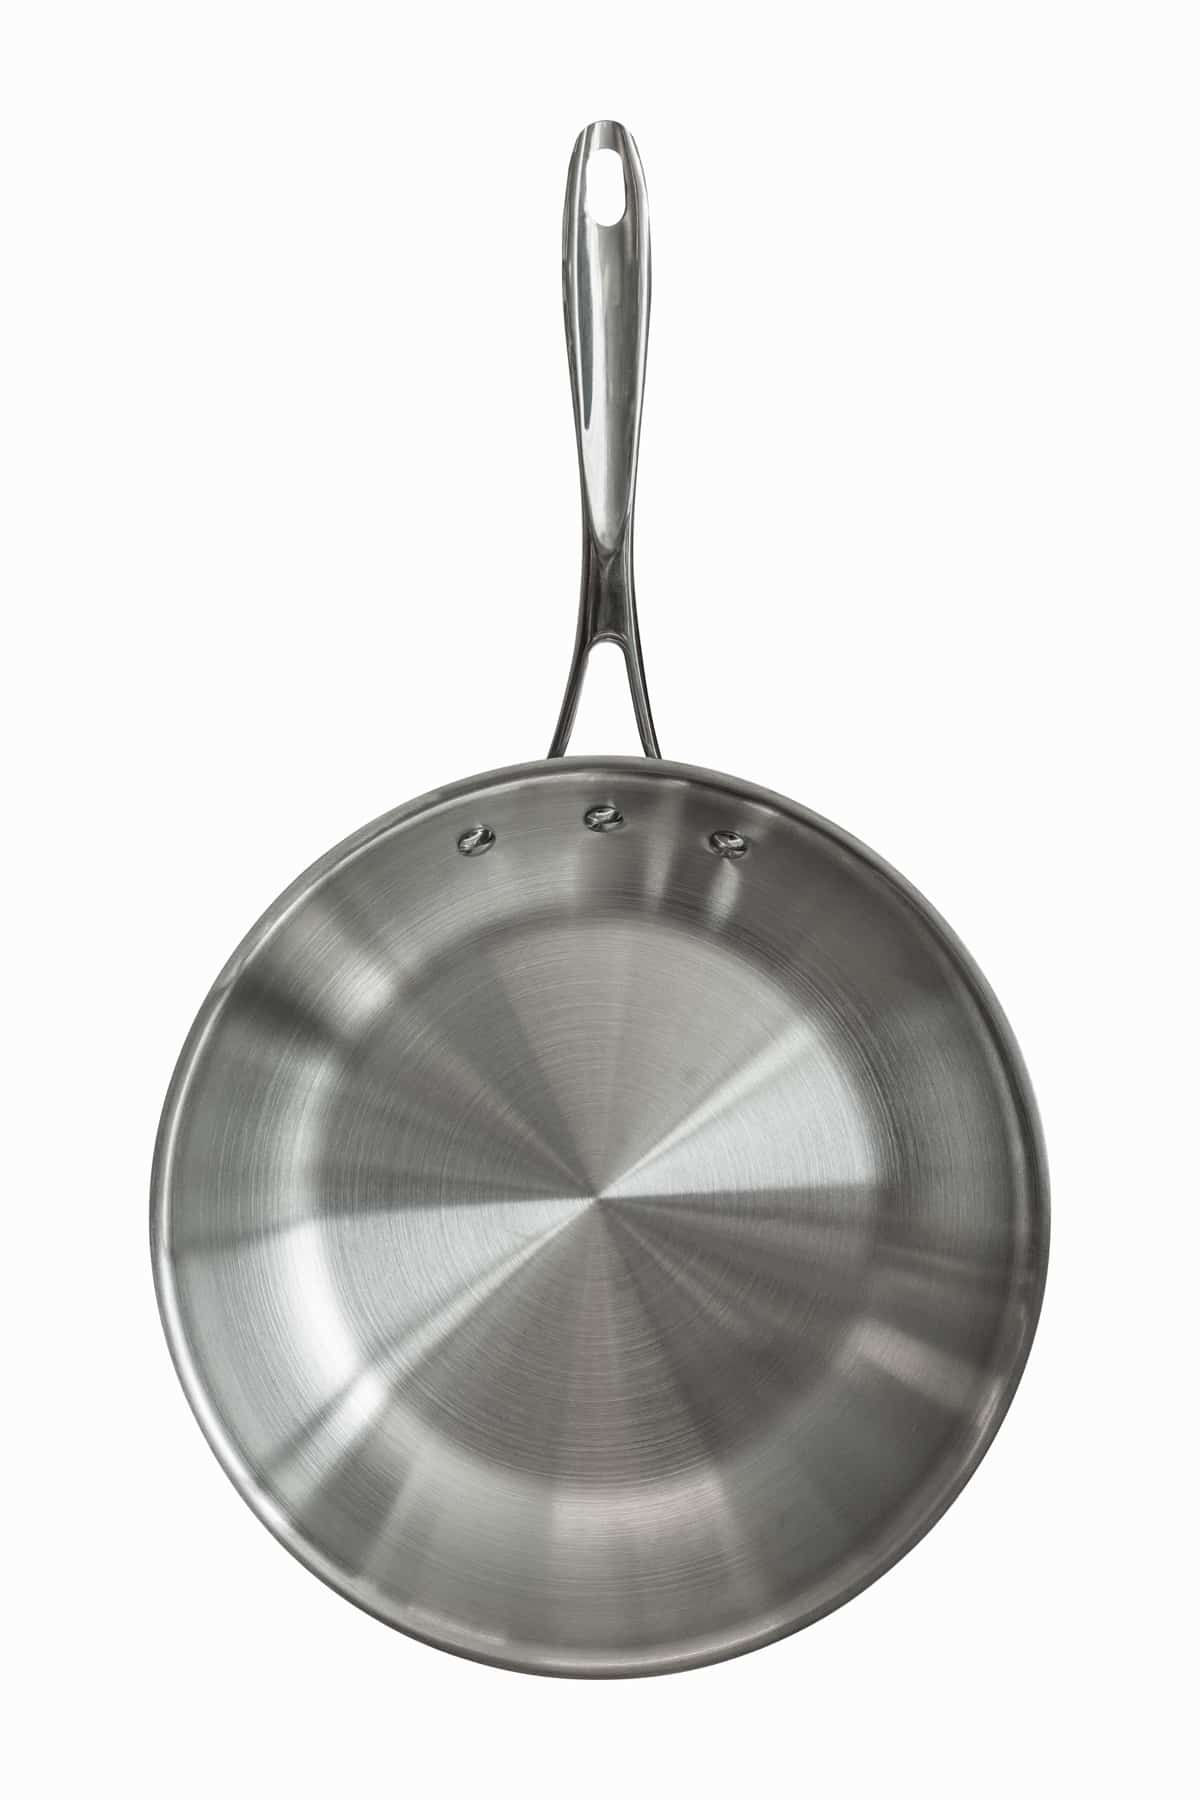 Overhead view of stainless steel frying pan. 